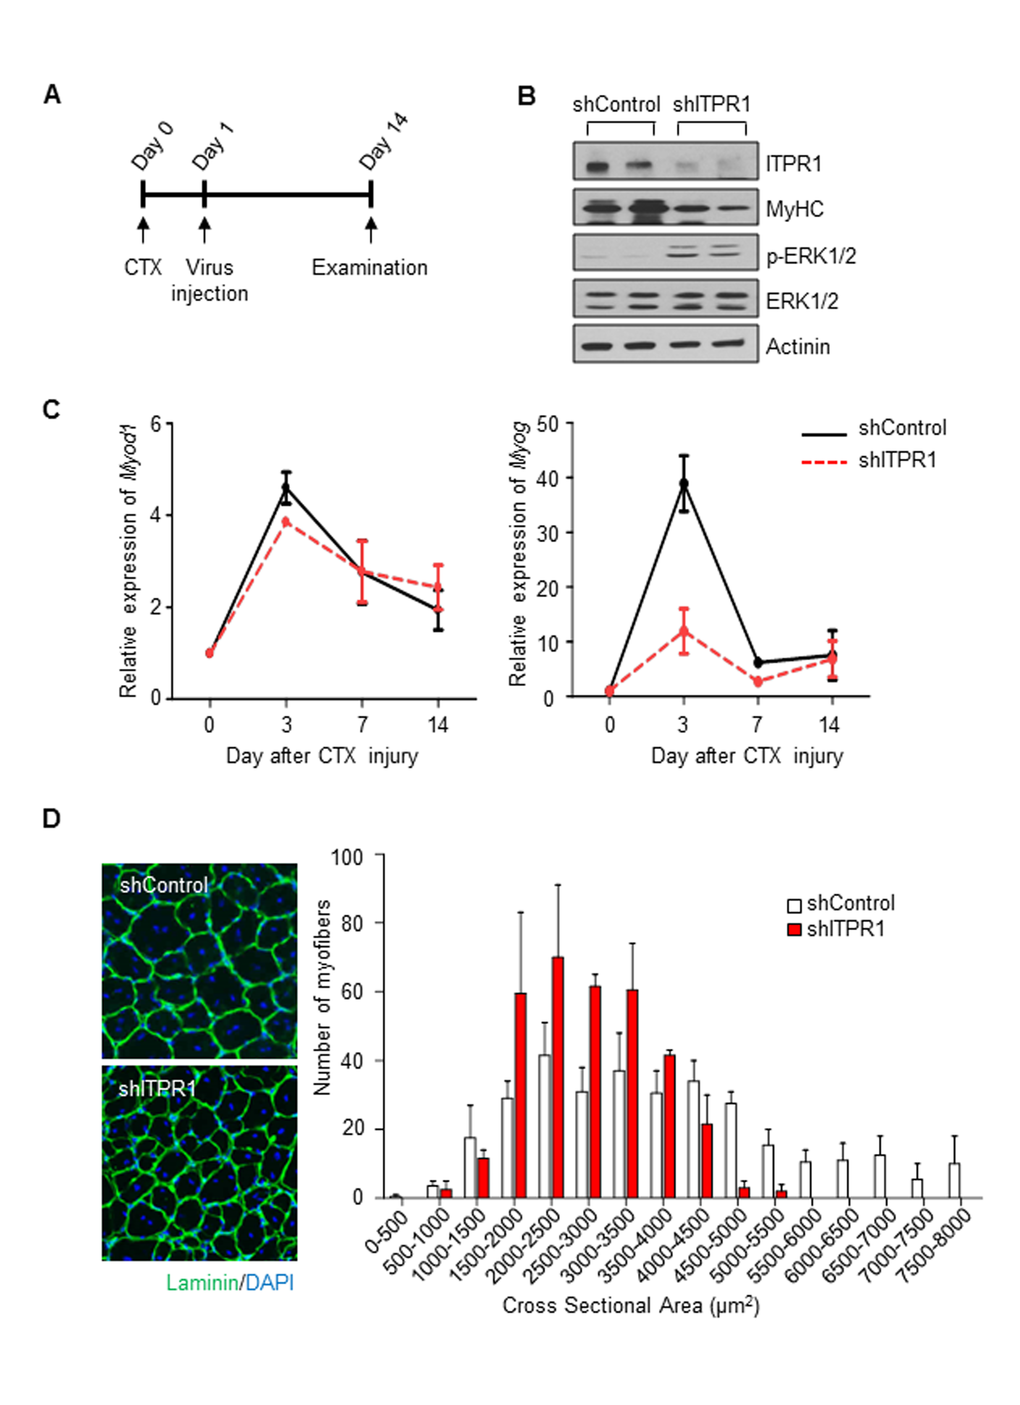 Intramuscular adenovirus-mediated ITPR1 silencing delays muscle regeneration. (A) Scheme of the in vivo experimental procedure. TA muscles of C57BL/6 mice were injected with 50 μl of 20 μM CTX using an insulin syringe at day 0. The next day, injured TA muscle tissues were injected with adenovirus encoding shITPR1-RFP or scrambled shRNA-RFP (1.4x109 particles) using an insulin syringe. At the indicated days, muscle tissues were harvested for biochemical and histological analyses. (B) Immunoblot analysis of ITPR1 knockdown and control mouse TA muscle lysates with anti-ITPR1, anti-MyHC, anti-phospho ERK1/2 and anti-ERK1/2 antibodies, with actinin as the loading control. (C) qRT-PCR analysis of the time-courses of Myod1 and Myog mRNA expression in ITPR1-silenced and control TA muscle samples subjected to CTX injury, relative to 36b4. n = 3 for each group. (D) Representative immunohistochemistry images of Laminin (green) and DAPI (blue) staining of ITPR1-silenced and control TA muscle fibers on day 14 after CTX injury. Cross-sectional areas of muscle fiber were measured using NIS-Elements Microscope Imaging software (Nikon) and fiber size distributions are presented as means ± S.D. (n = 3).